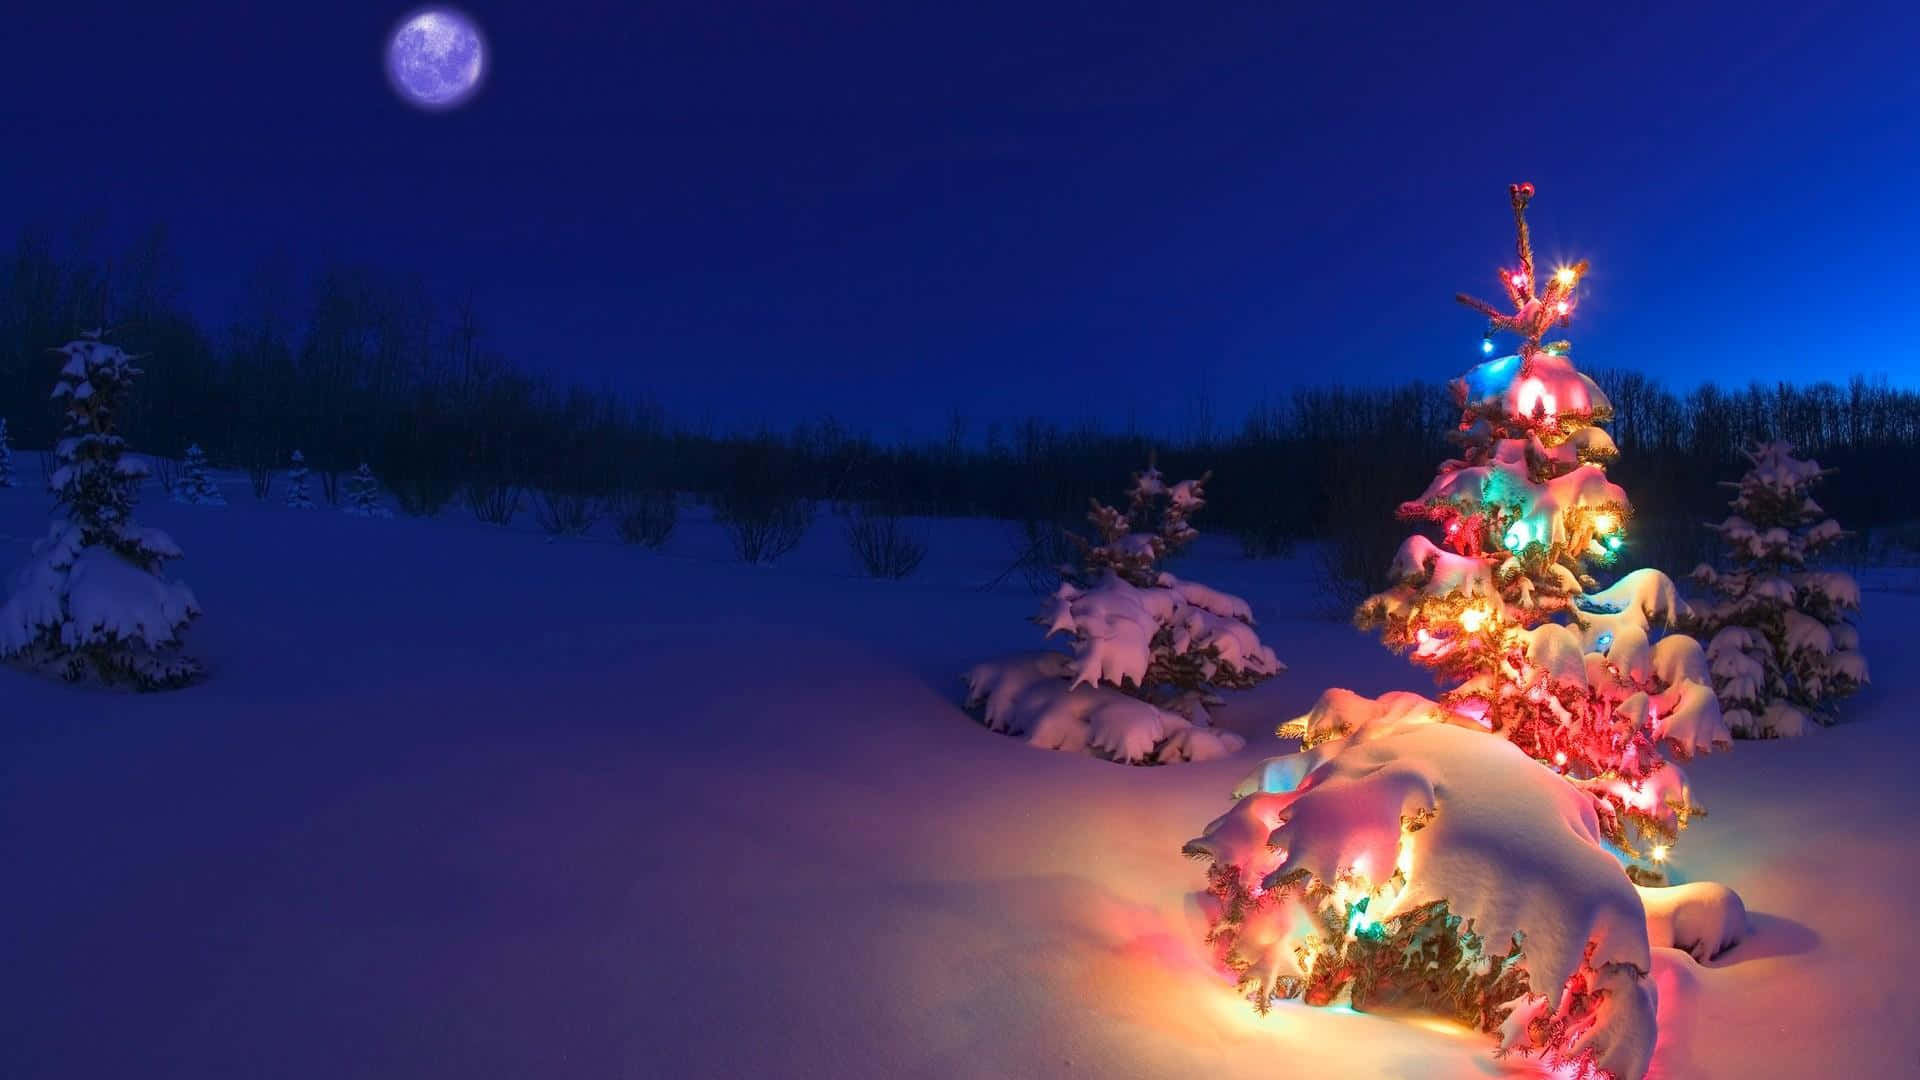 Christmas Tree In The Snow With Lights